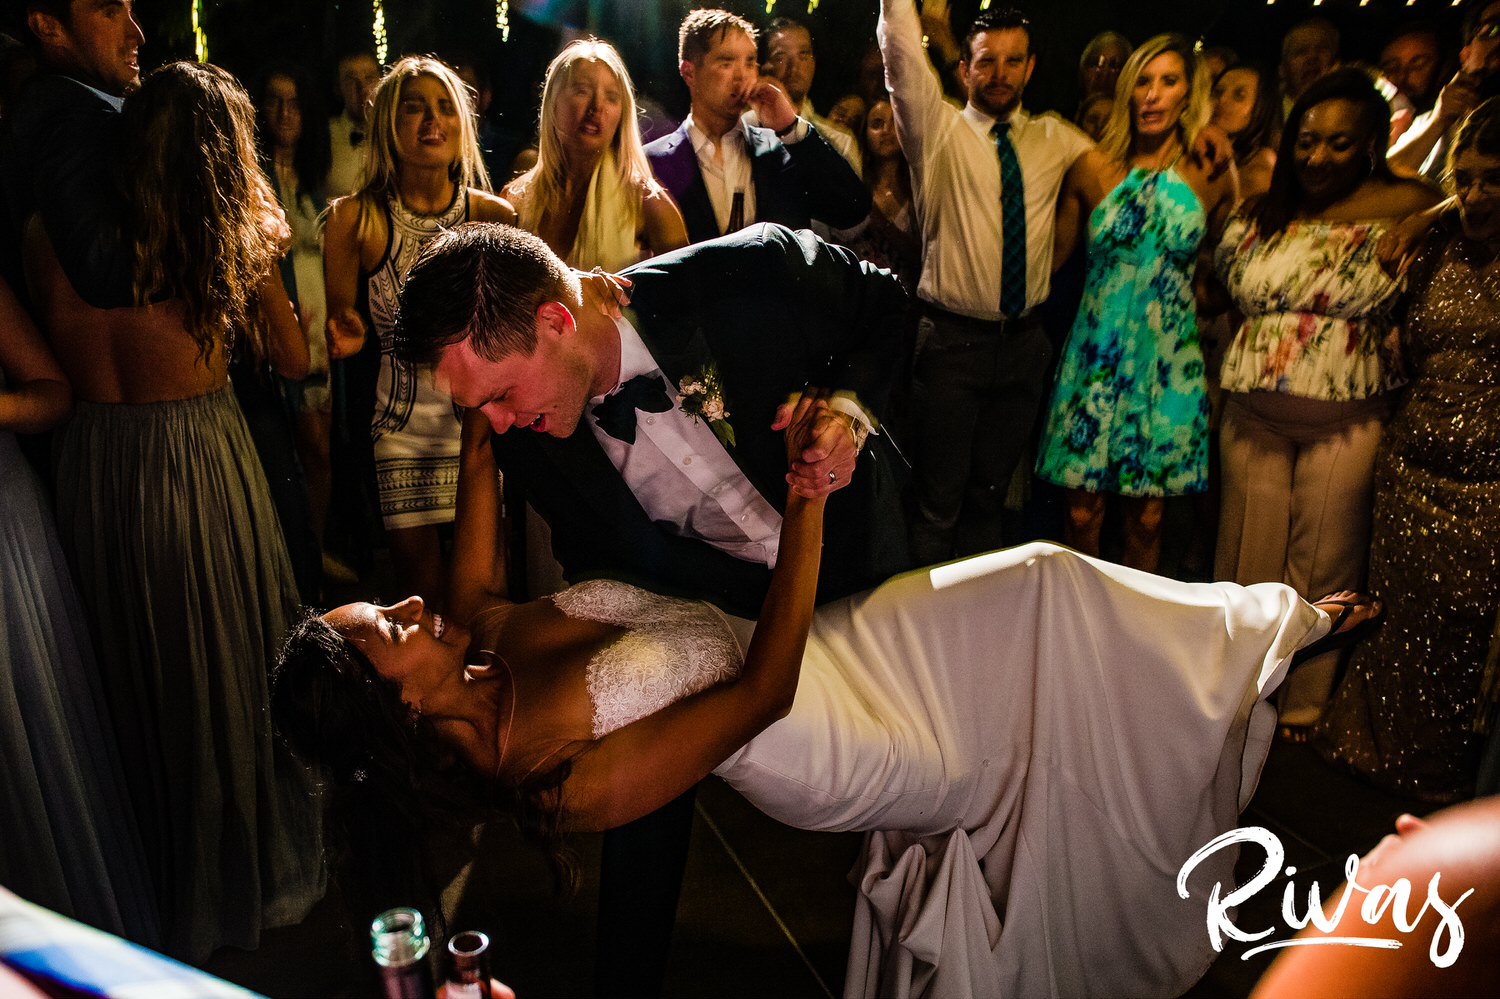 Saddlerock Ranch Summer Wedding | Destination Wedding Photographers | Rivas | A candid image of a groom dipping his bride during their last dance while friends and family cheer them on during their wedding reception at Saddlerock Ranch in Malibu, CA. 